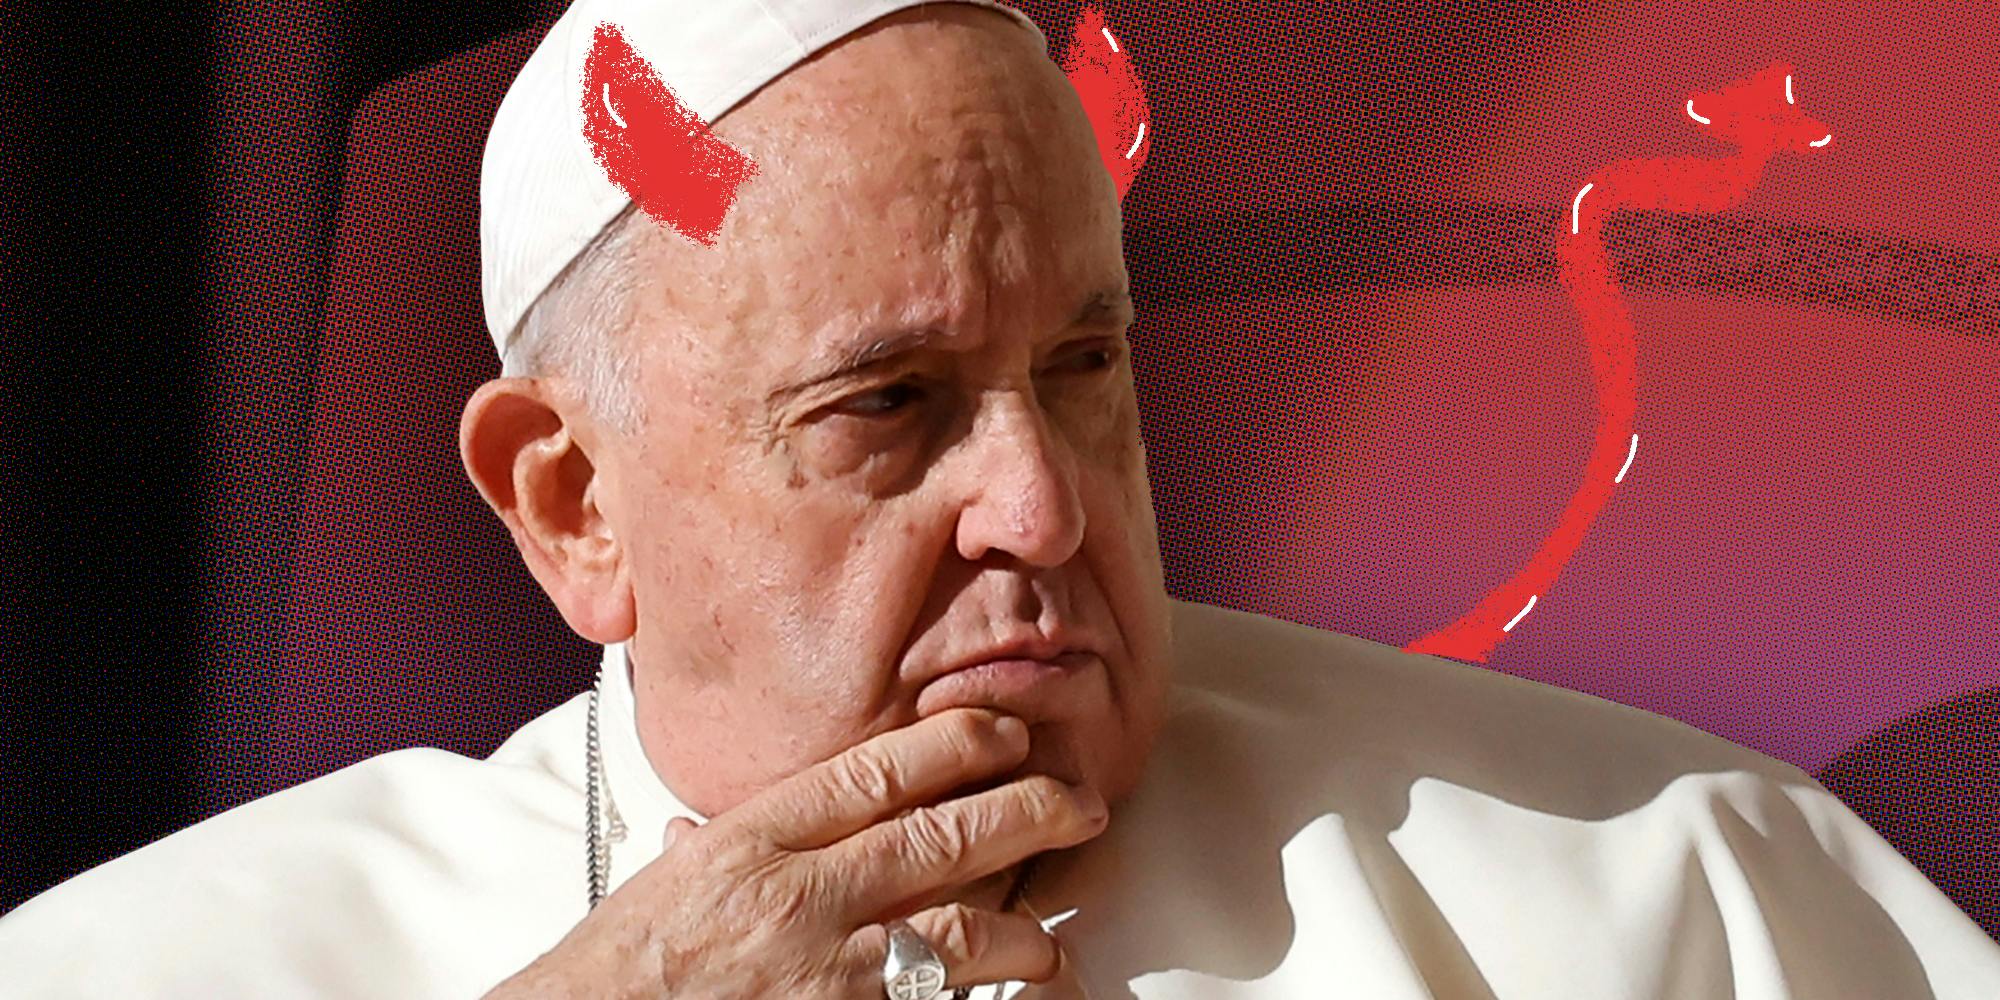 Pope with devil horns and tail